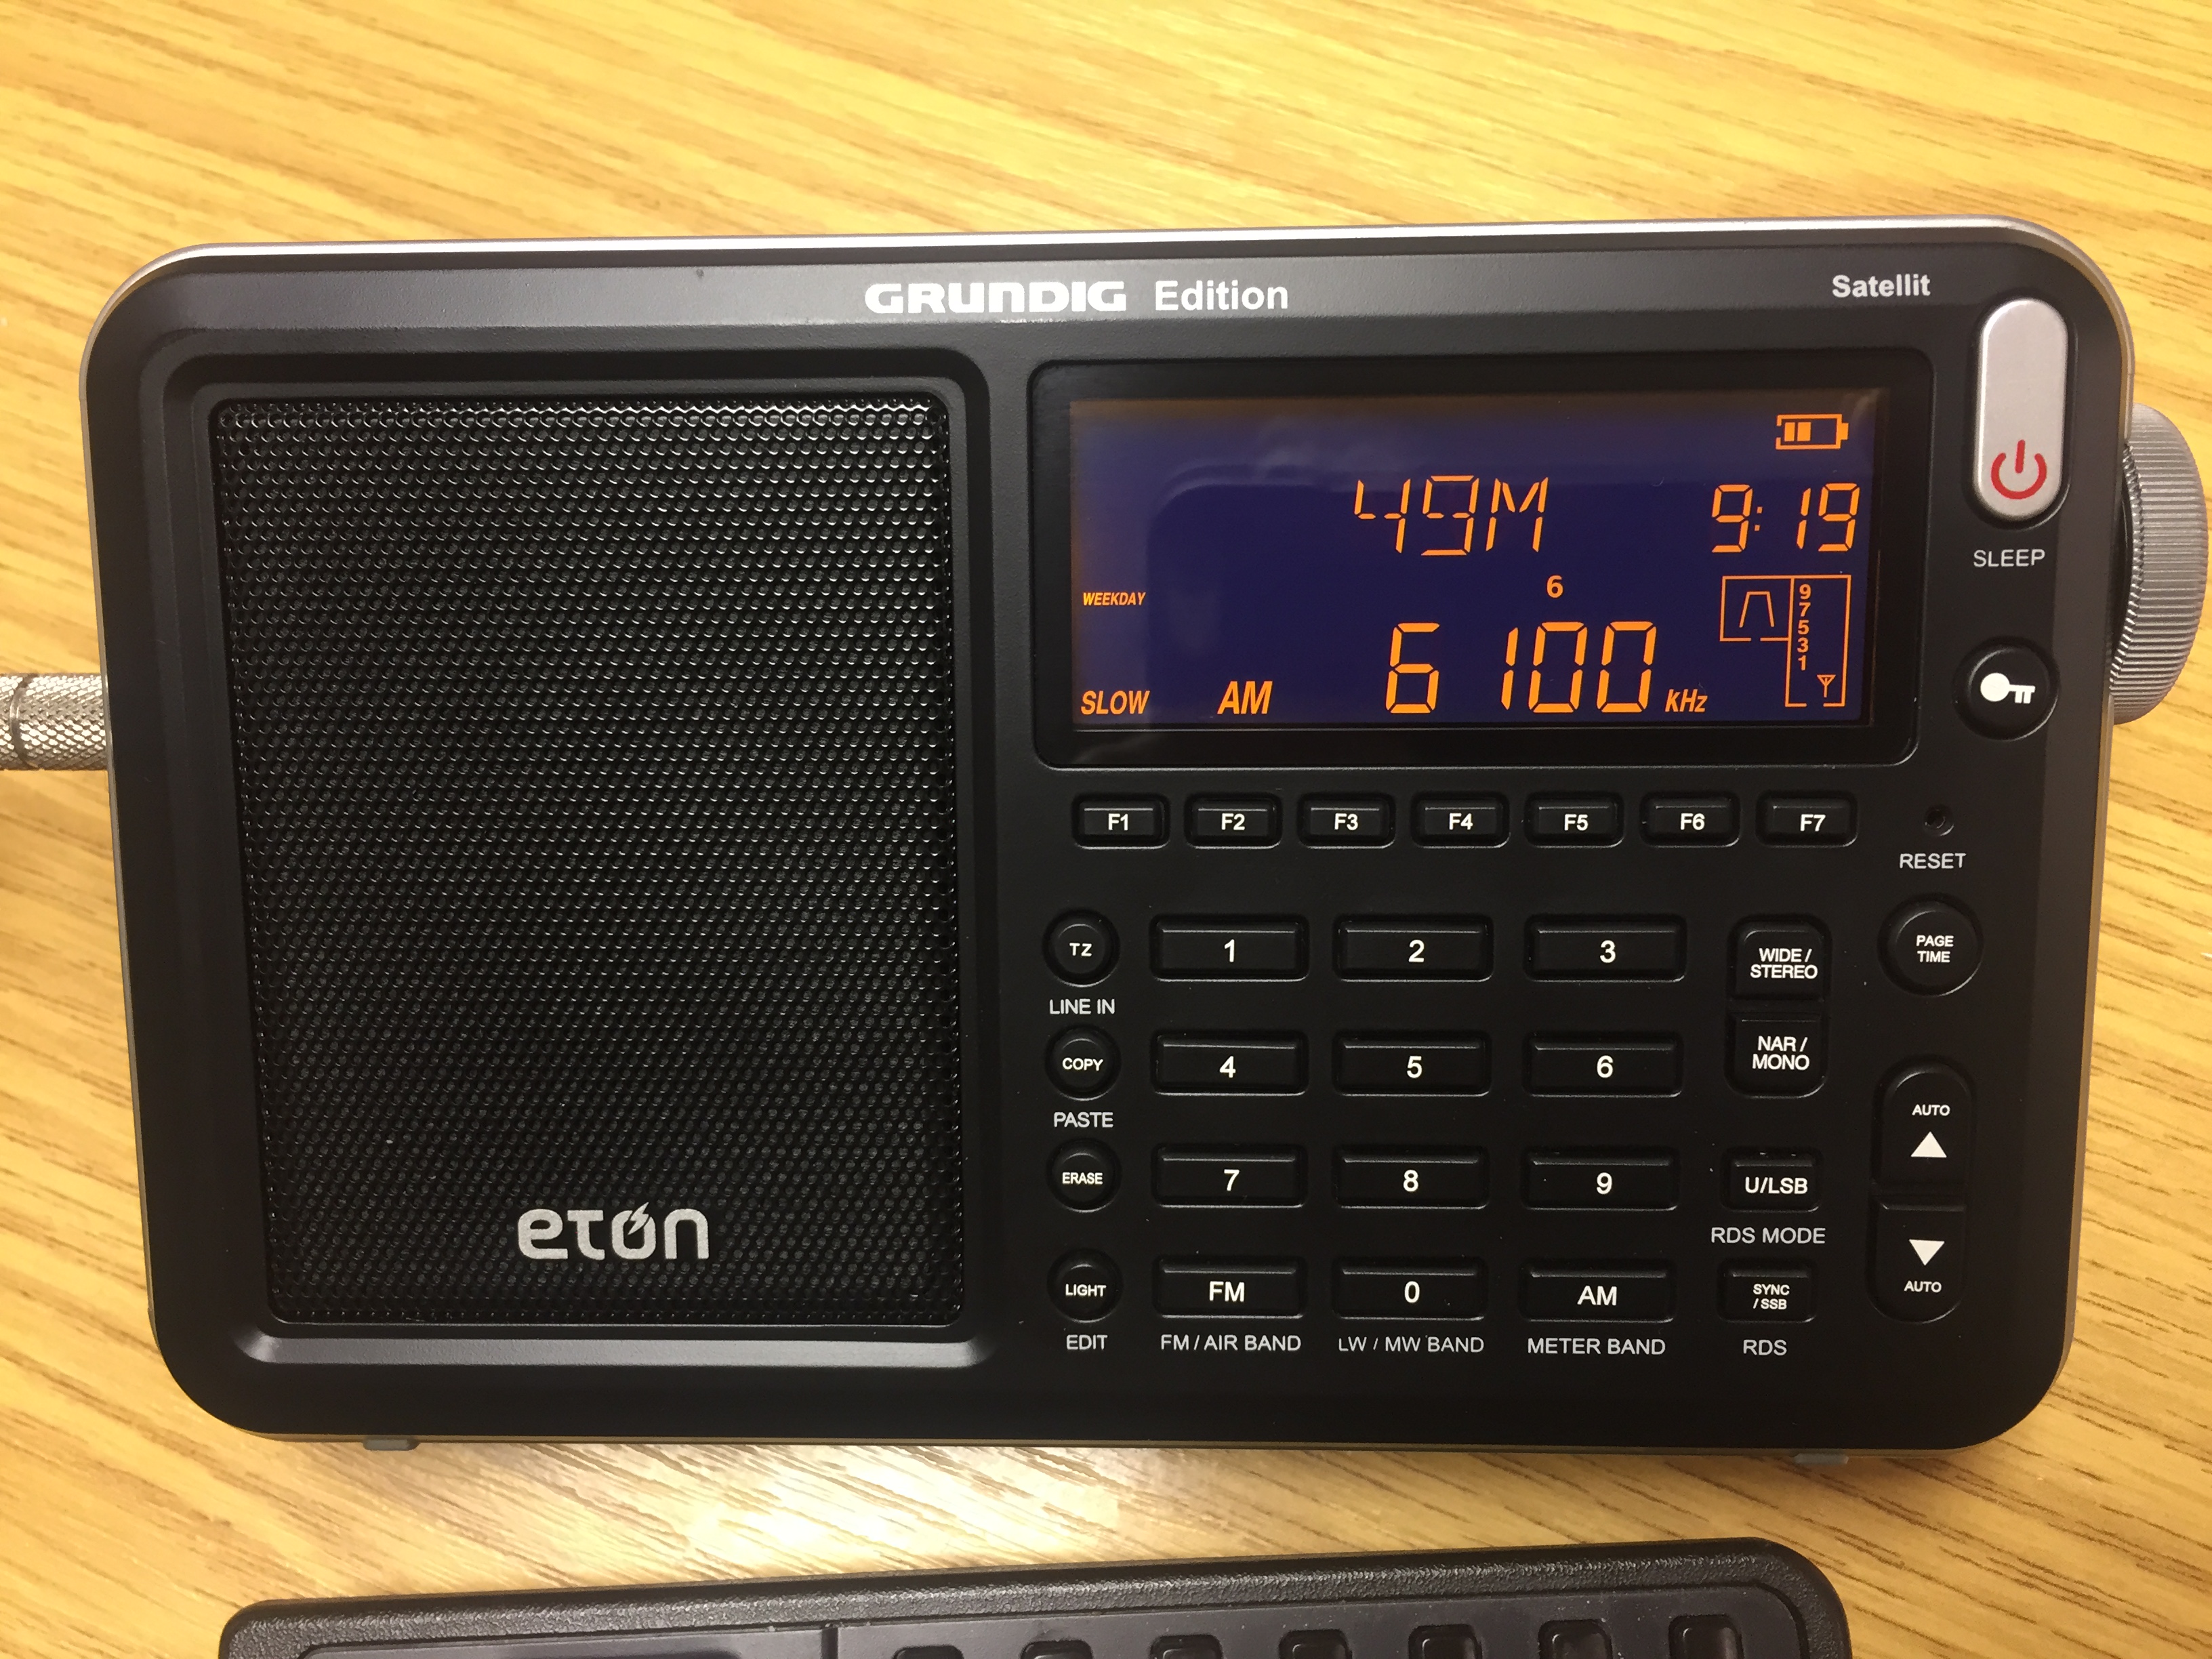 The Eton Satellit a short history and first impressions as a DX workhorse The SWLing Post